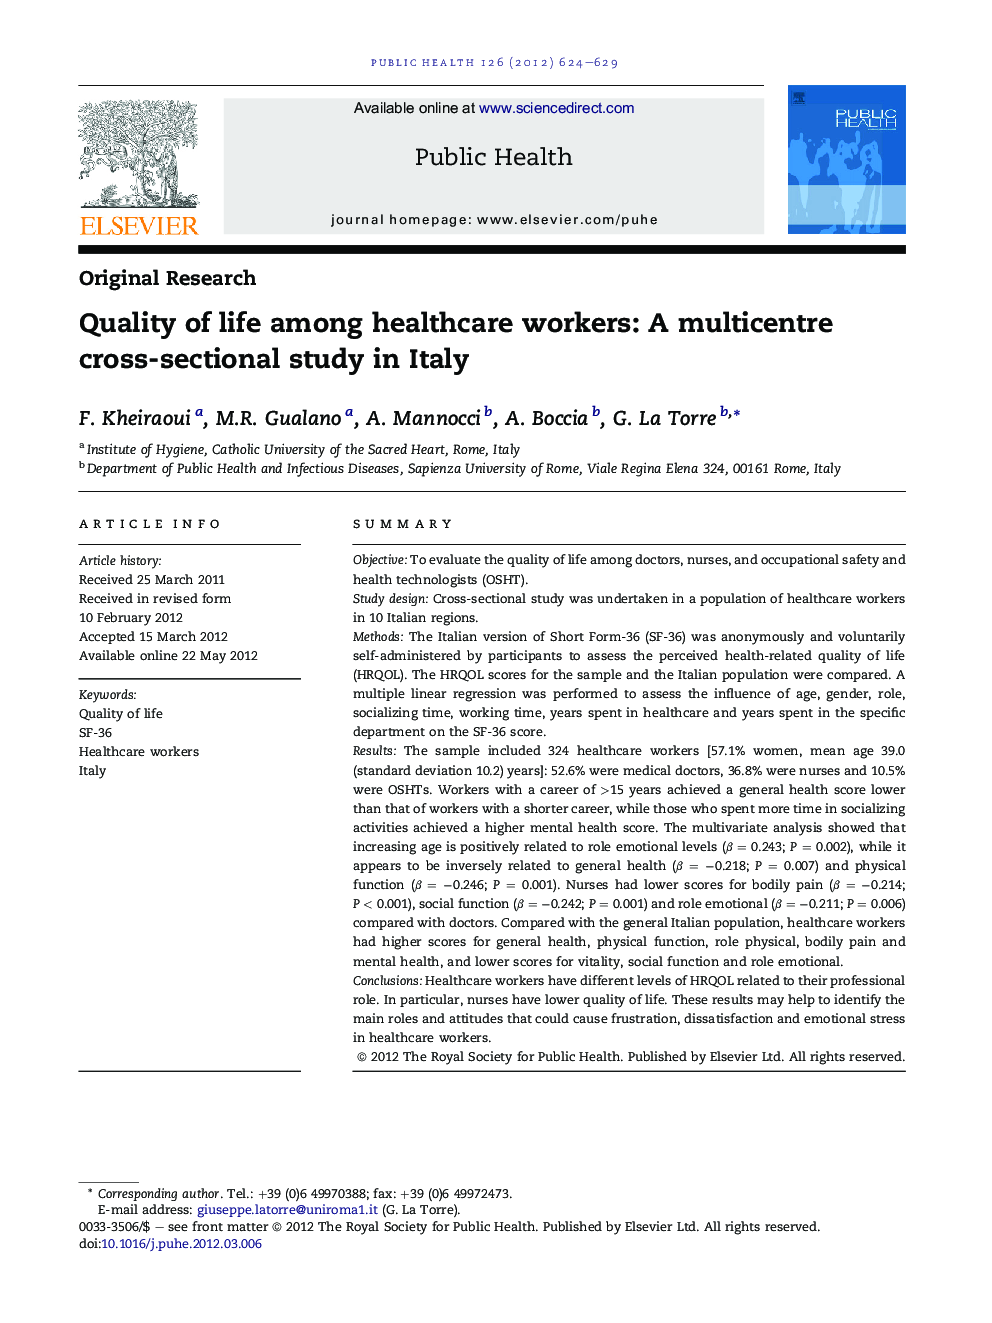 Quality of life among healthcare workers: A multicentre cross-sectional study in Italy